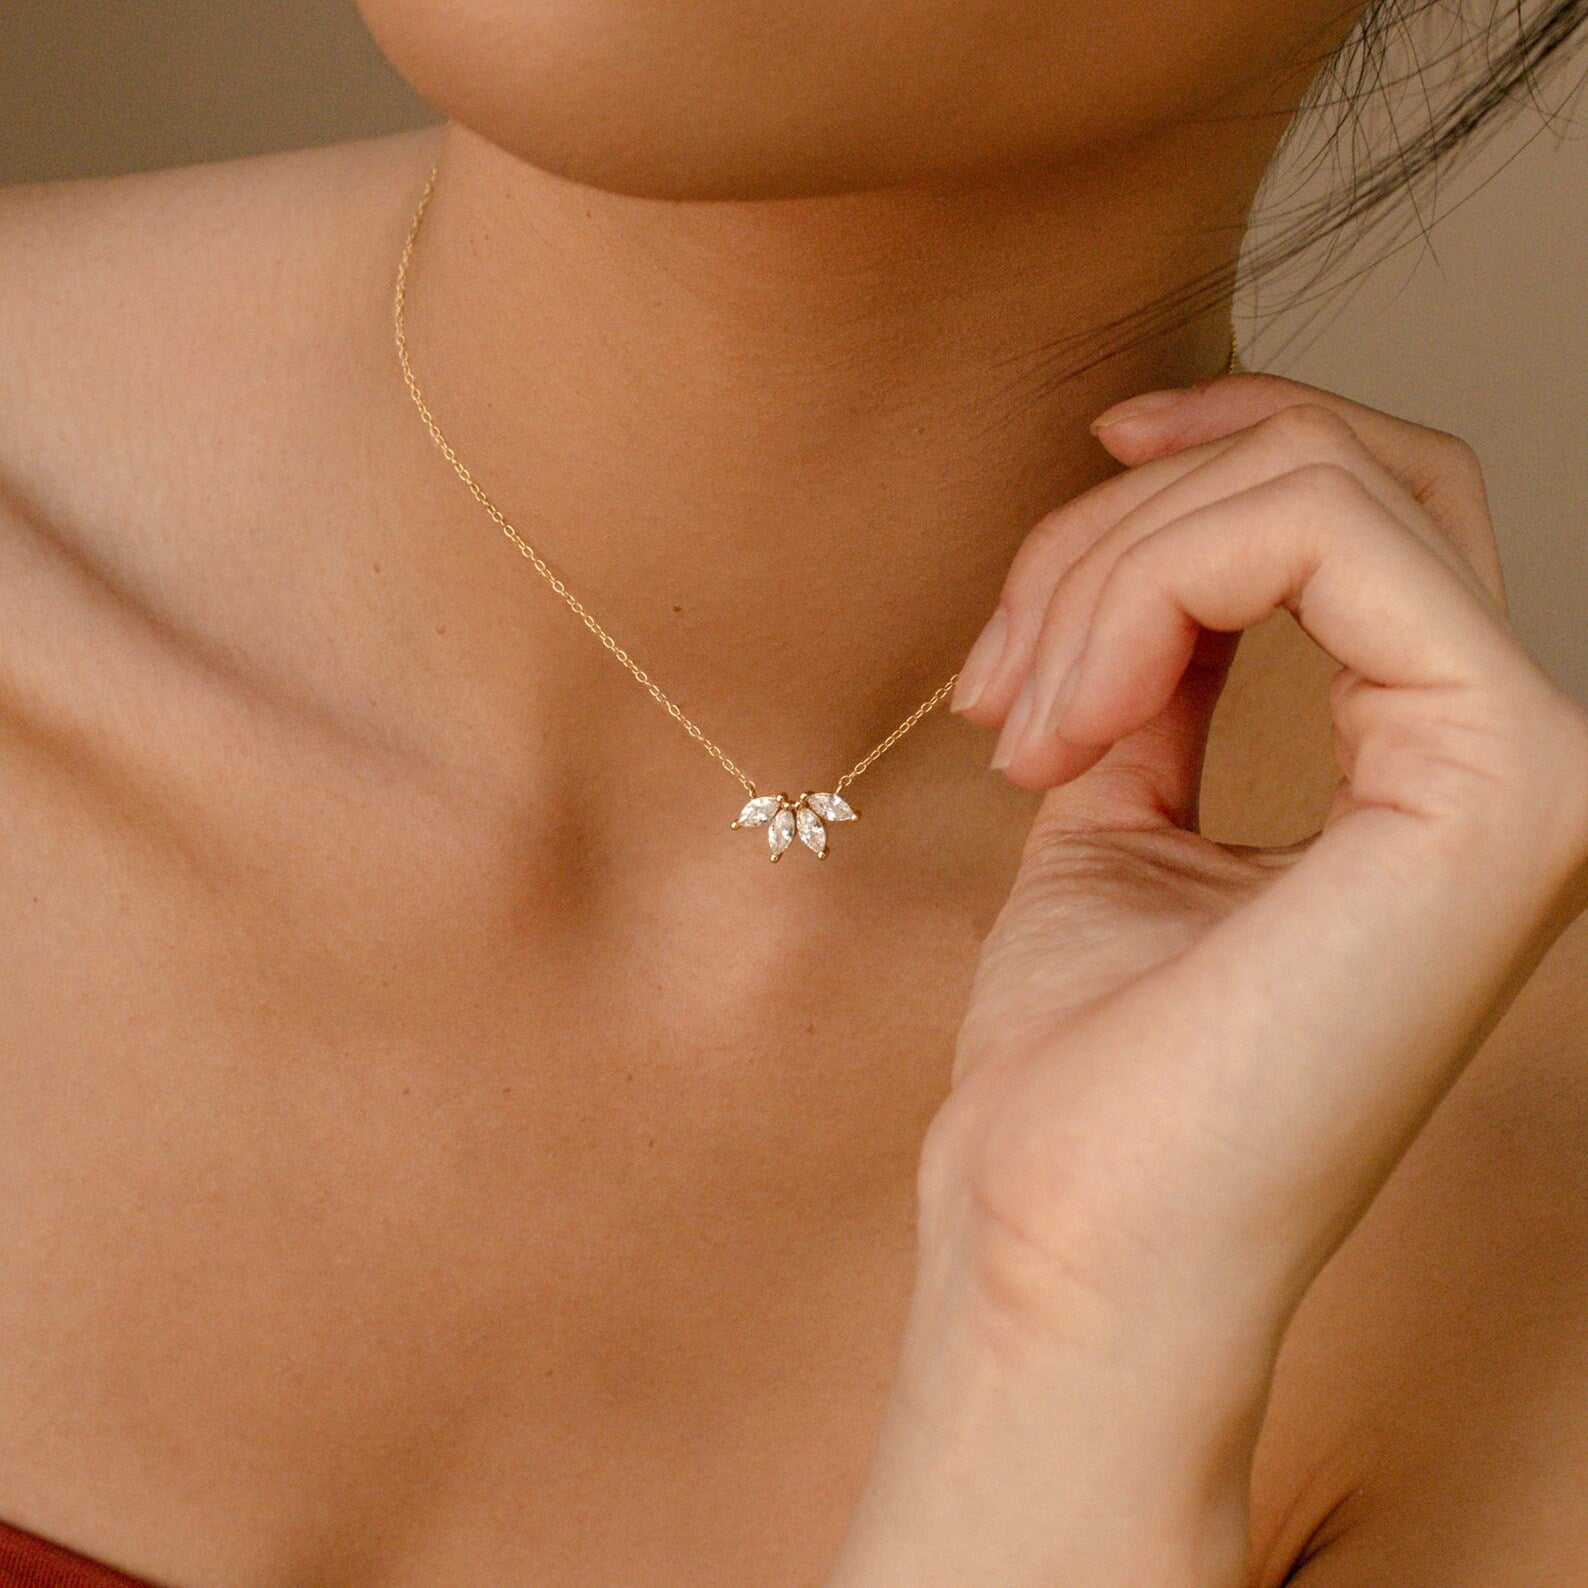 In Full Bloom - Diamond Daisy Charm Necklace